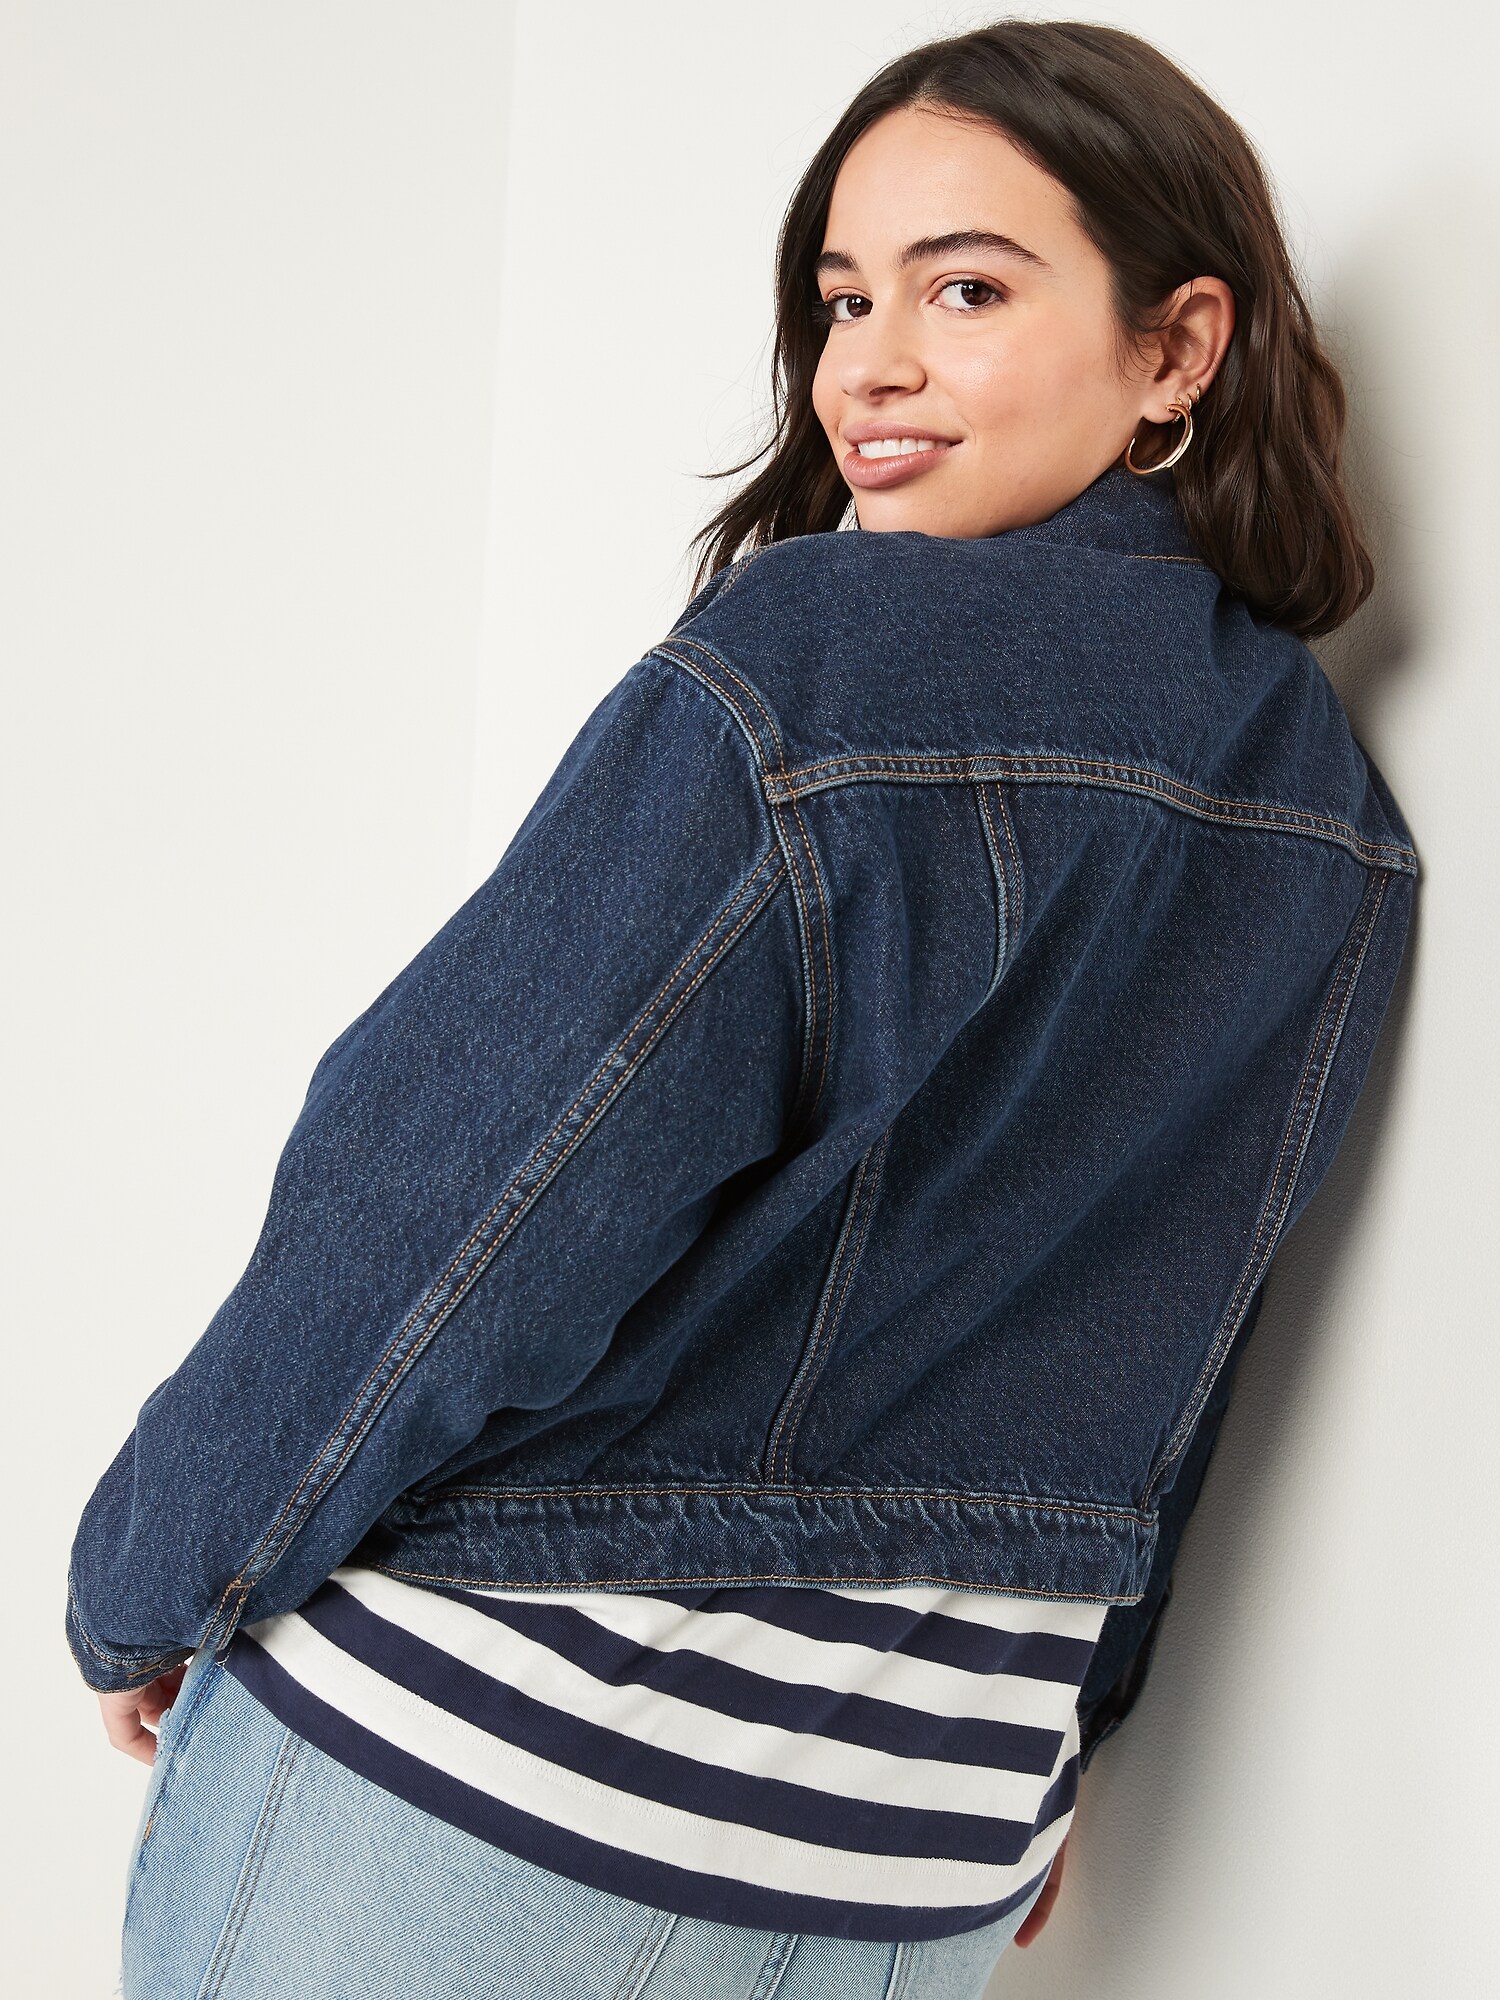 Long-Sleeve Cropped Jean Jacket for Women | Old Navy